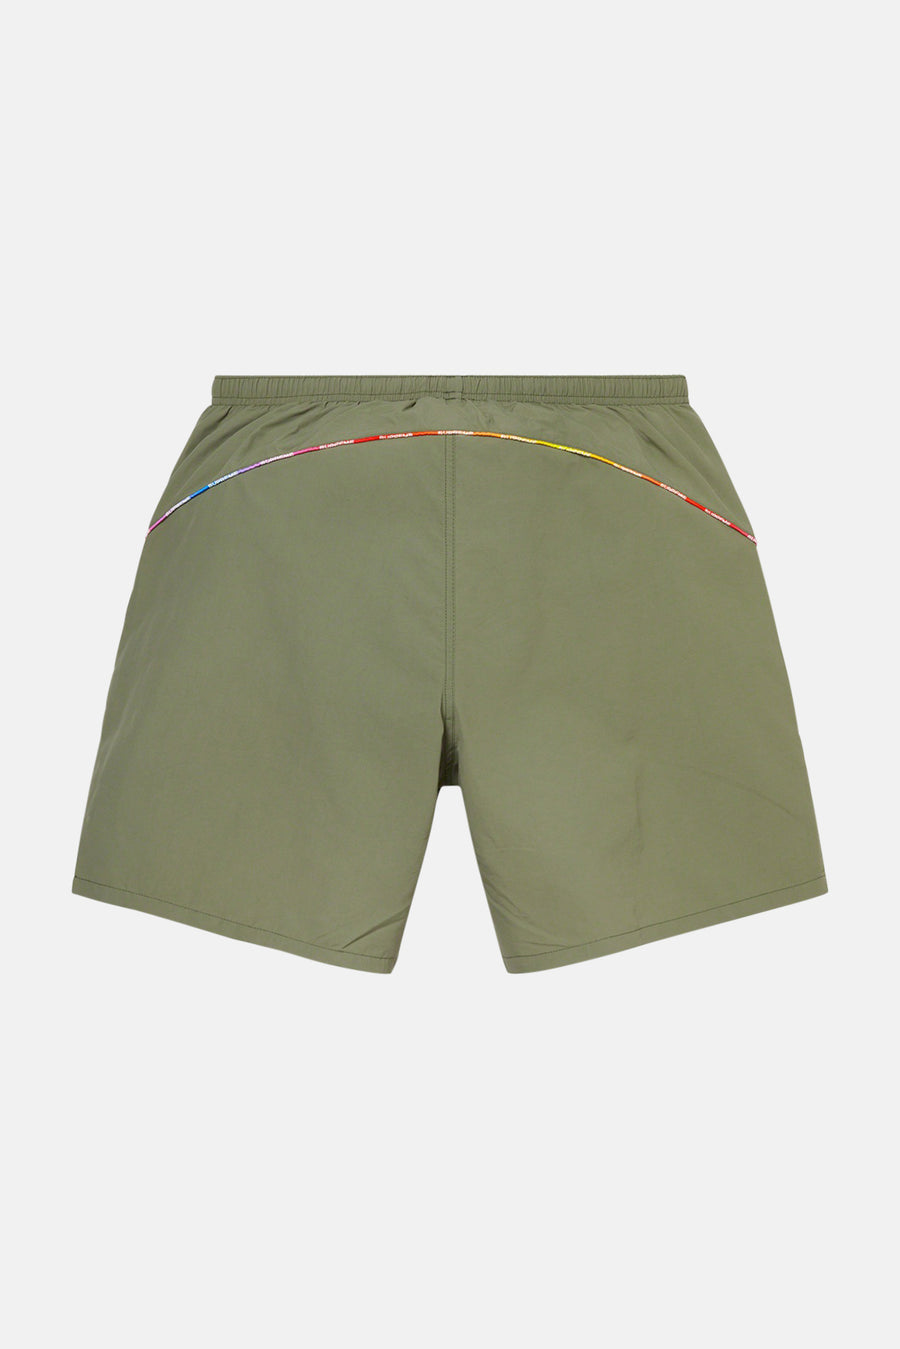 Gradient Piping Water Short Olive